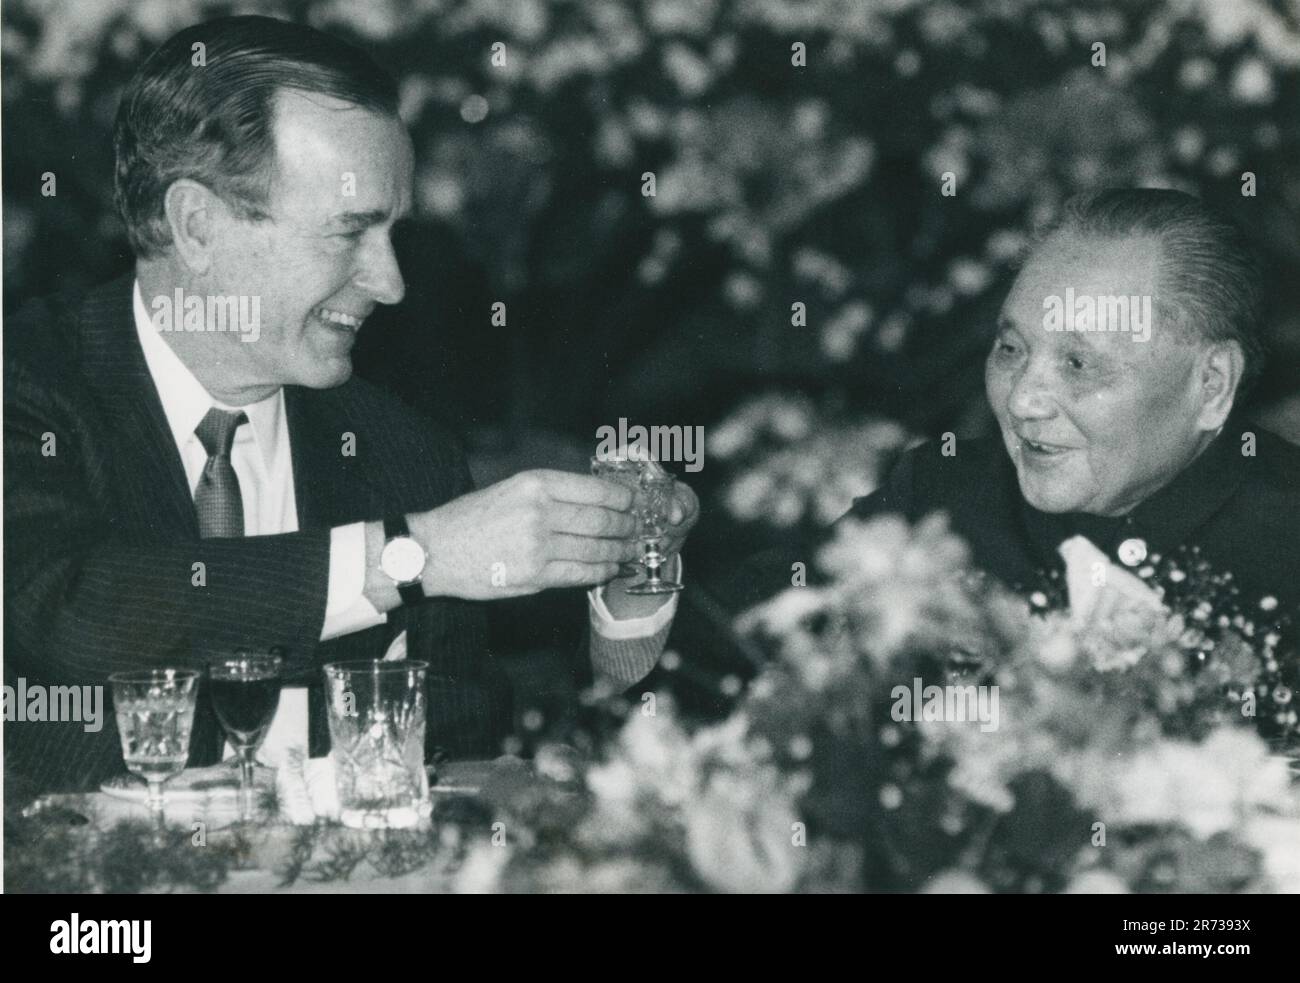 U.S. President George H Bush toasts with Chinese senior leader Deng Xiaoping at a banquet held at the Great Hall of the People in Beijing, China on Feb 26, 1989. Stock Photo